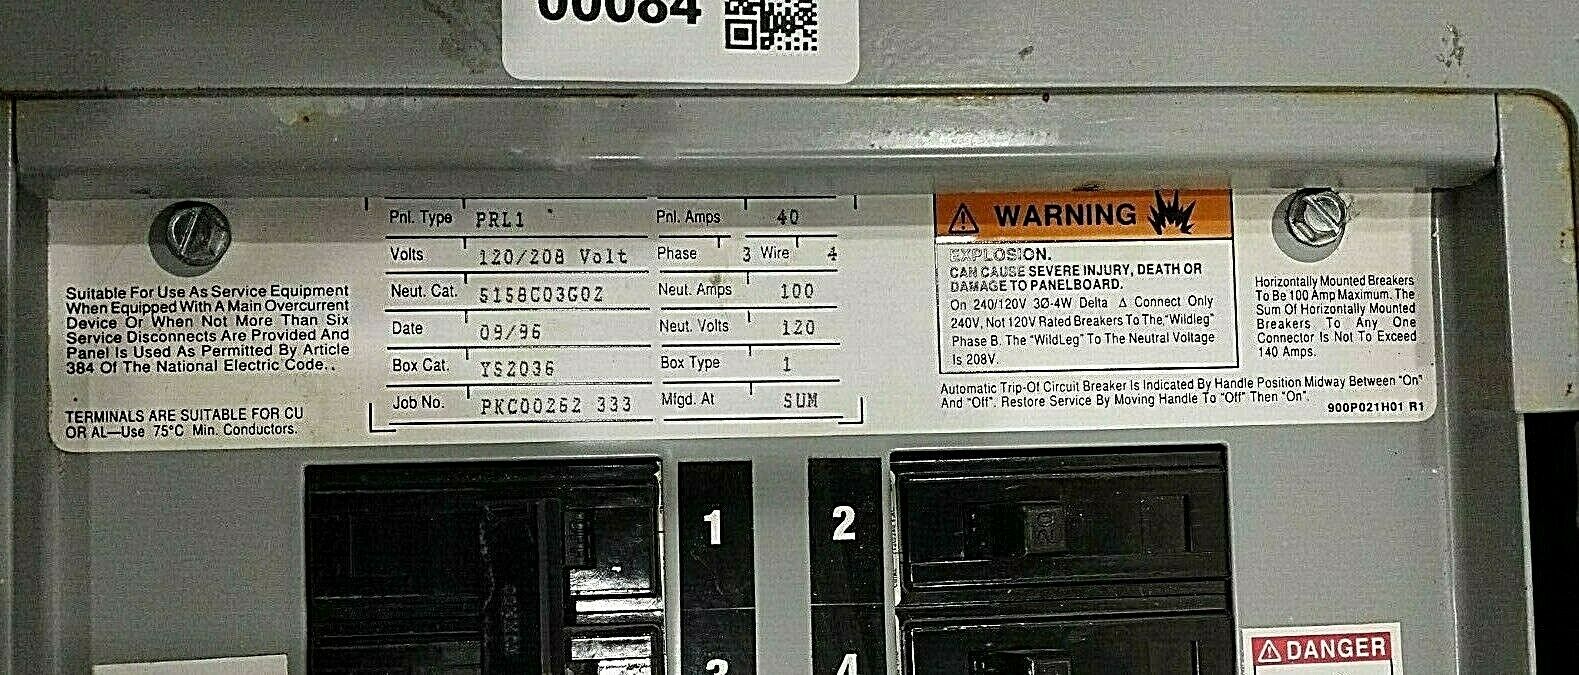 Cutler Hammer Panel With 40 Amps 1 8 Volts Main Breakers 3 Phase 4 Indsurp